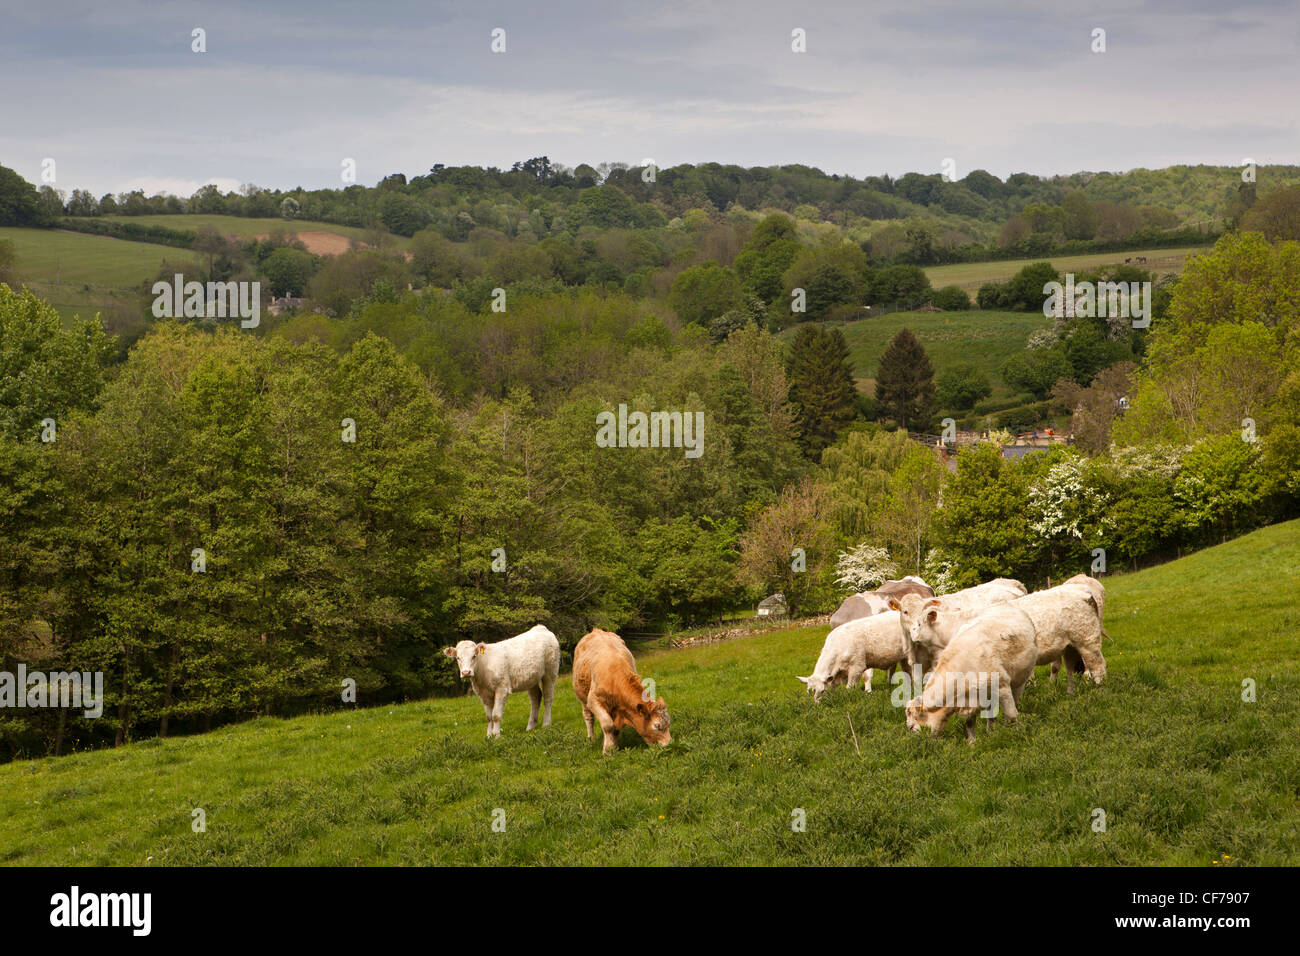 UK, Gloucestershire, Stroud, Slad Valley, agriculture, cows grazing in field above the village Stock Photo